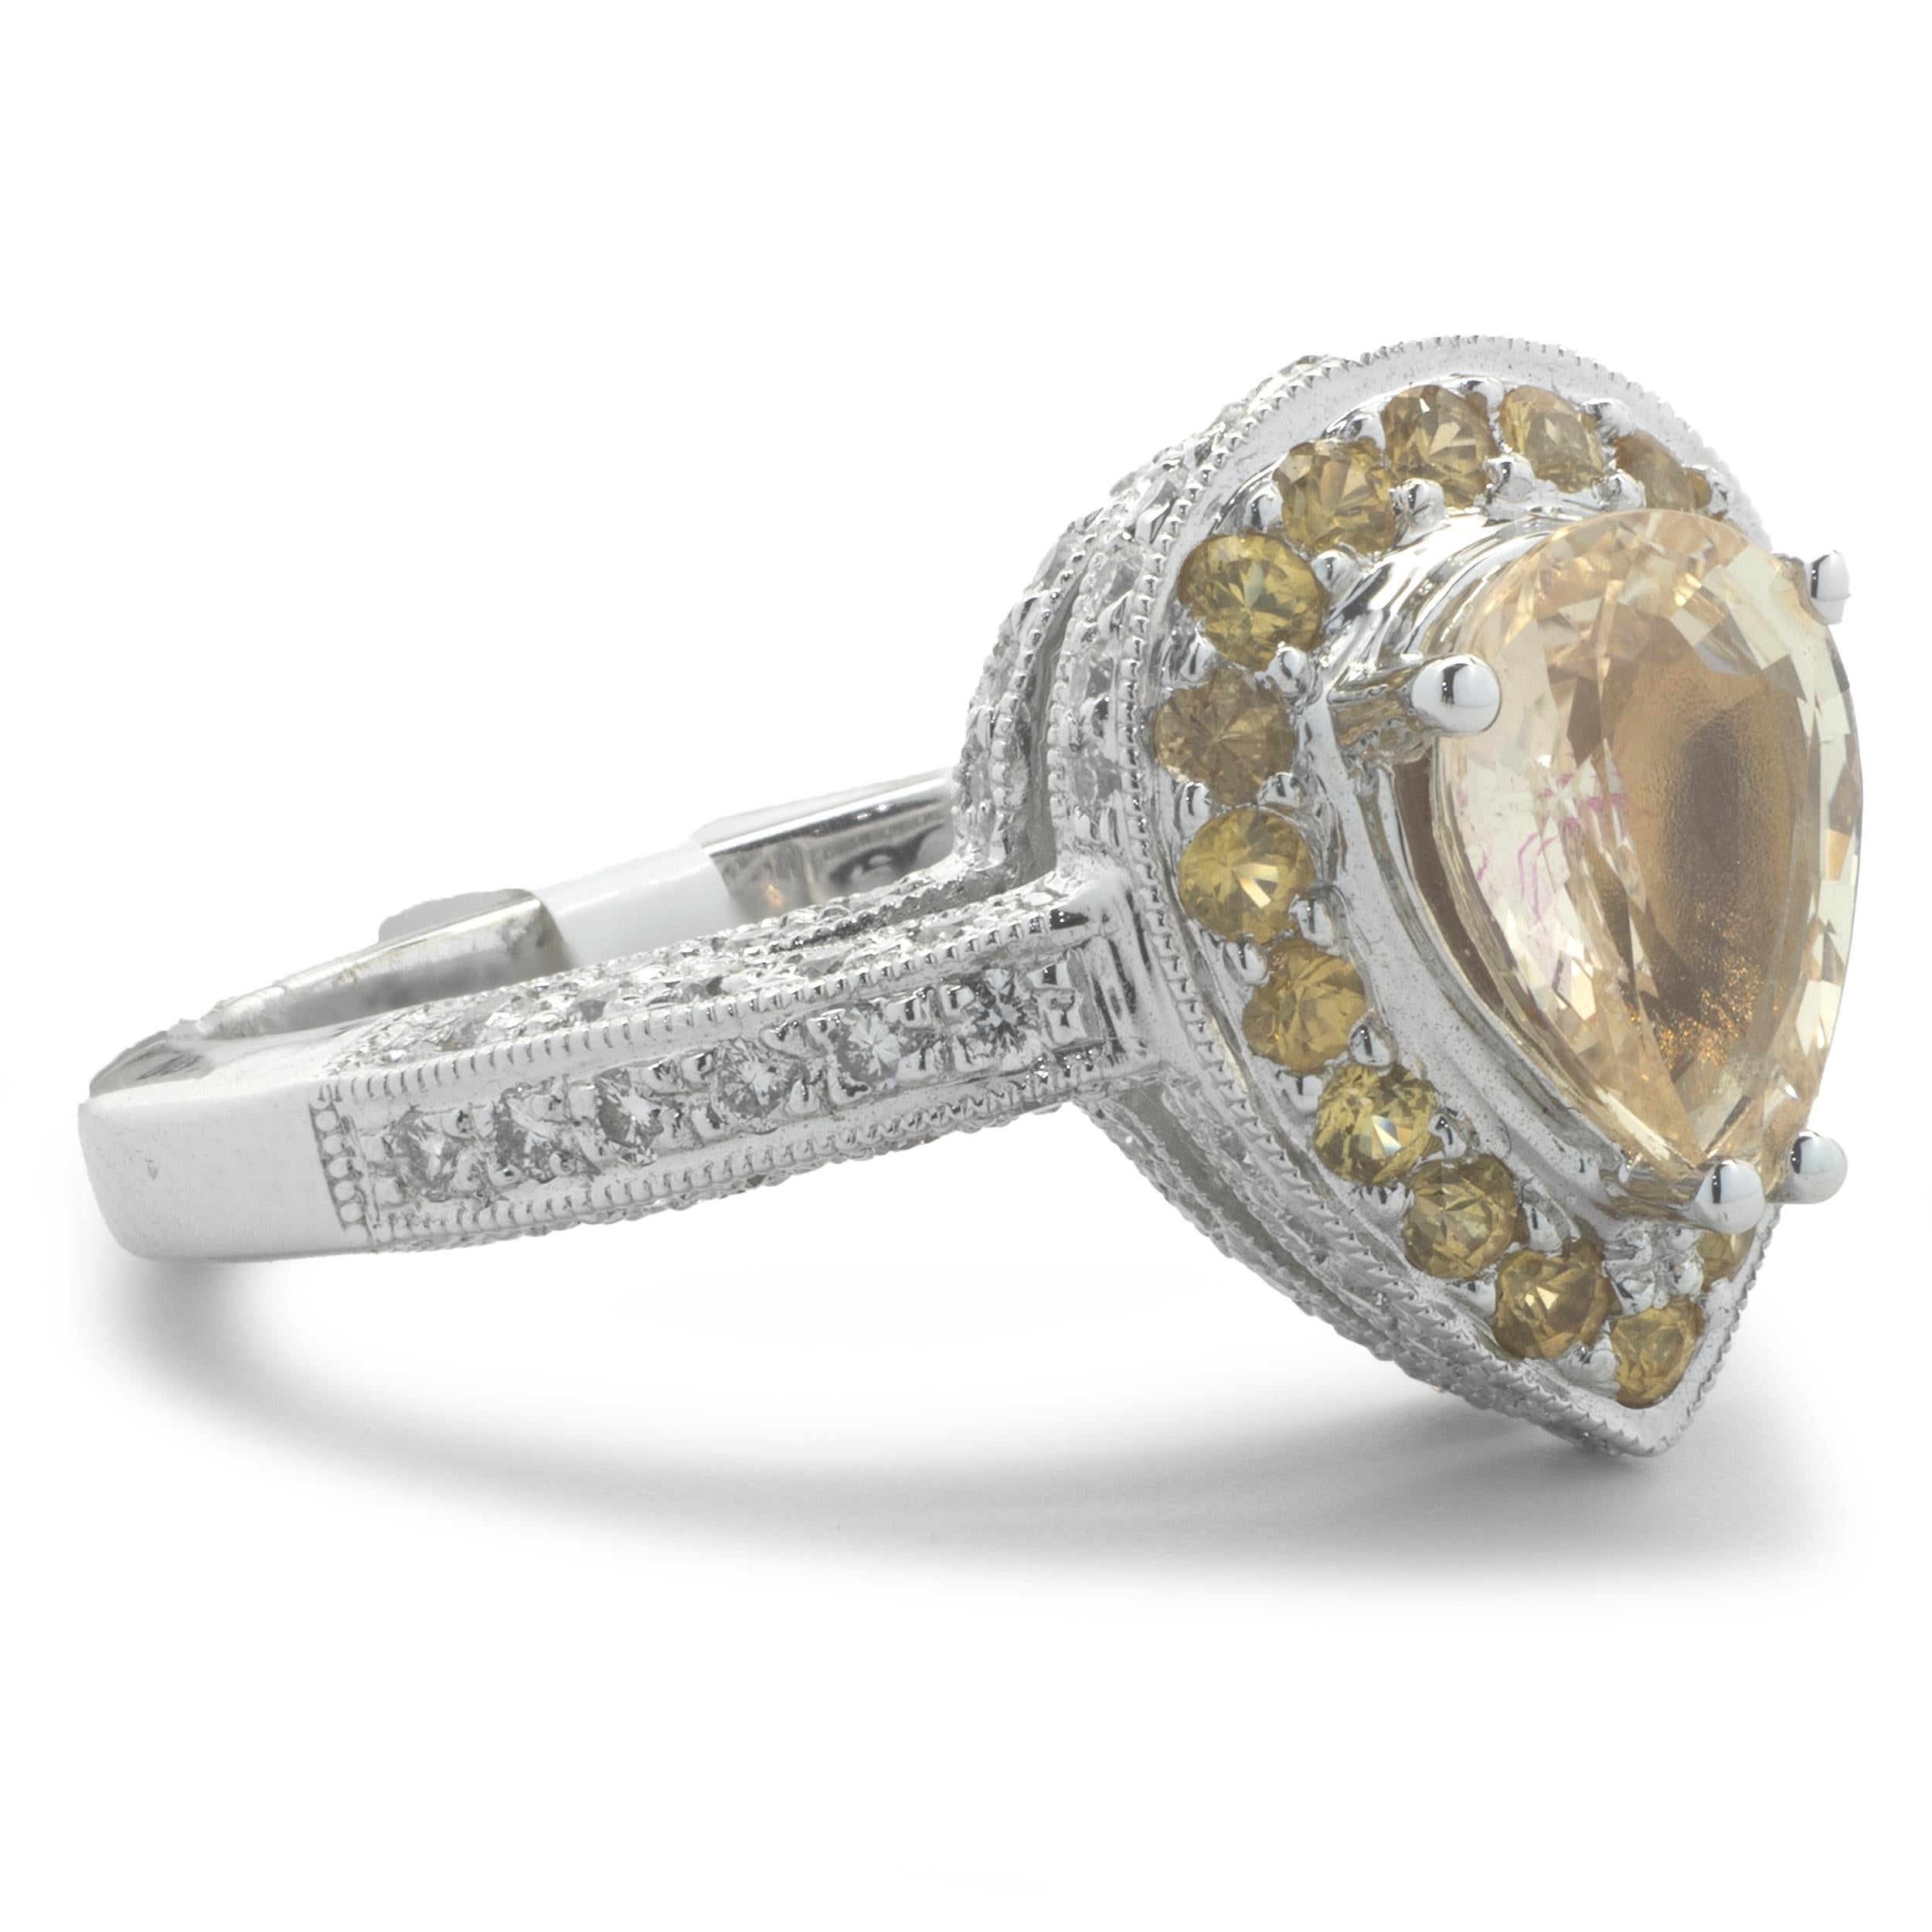 Material: 18K white gold
Diamonds: round brilliant cut = .44cttw
Color: G
Clarity: SI1
Yellow Sapphire: 1 pear cut = 1.64ct
Ring Size: 6.5 (allow up to two additional business days for sizing requests)
Weight: 5.98 grams
